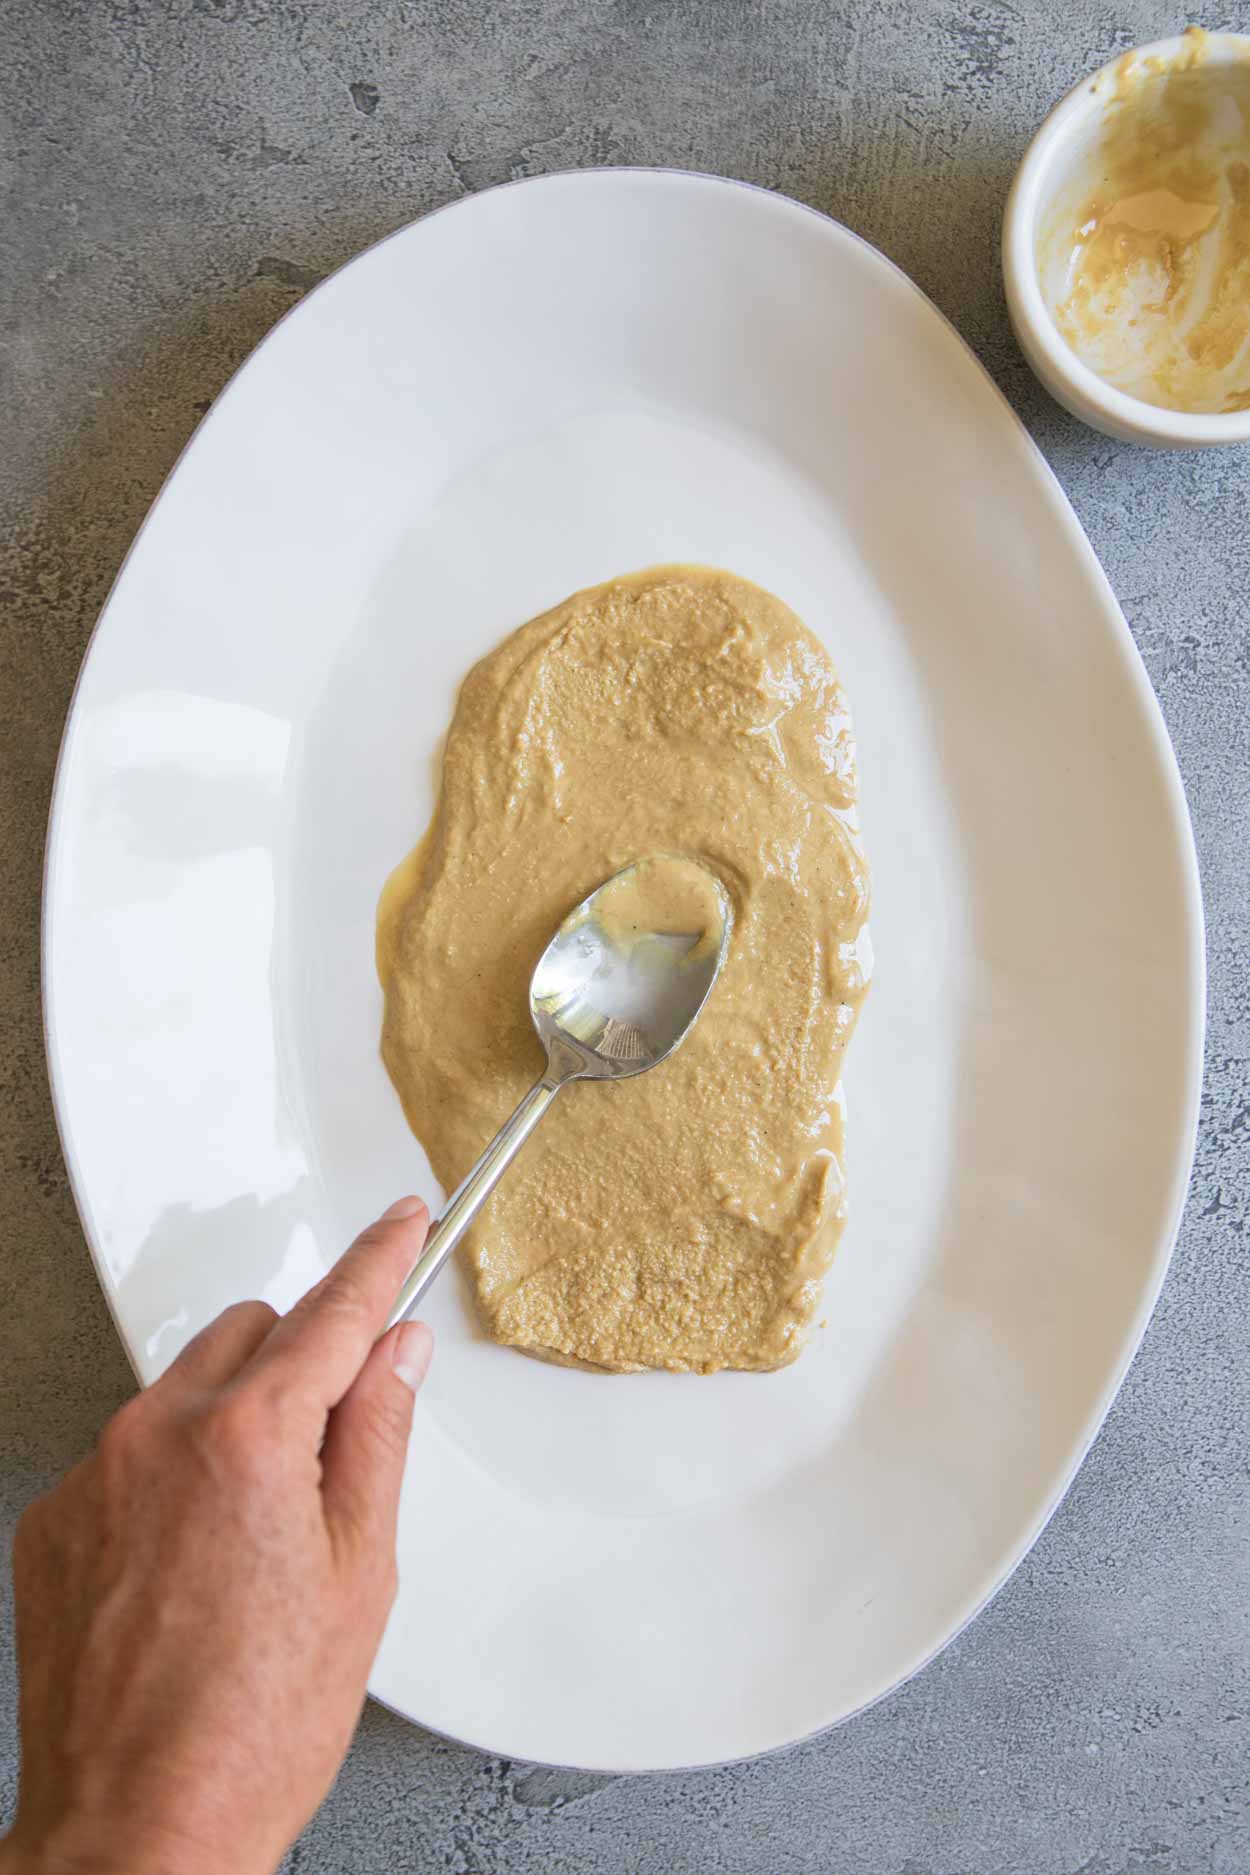 hummus being spread on a platter with a spoon